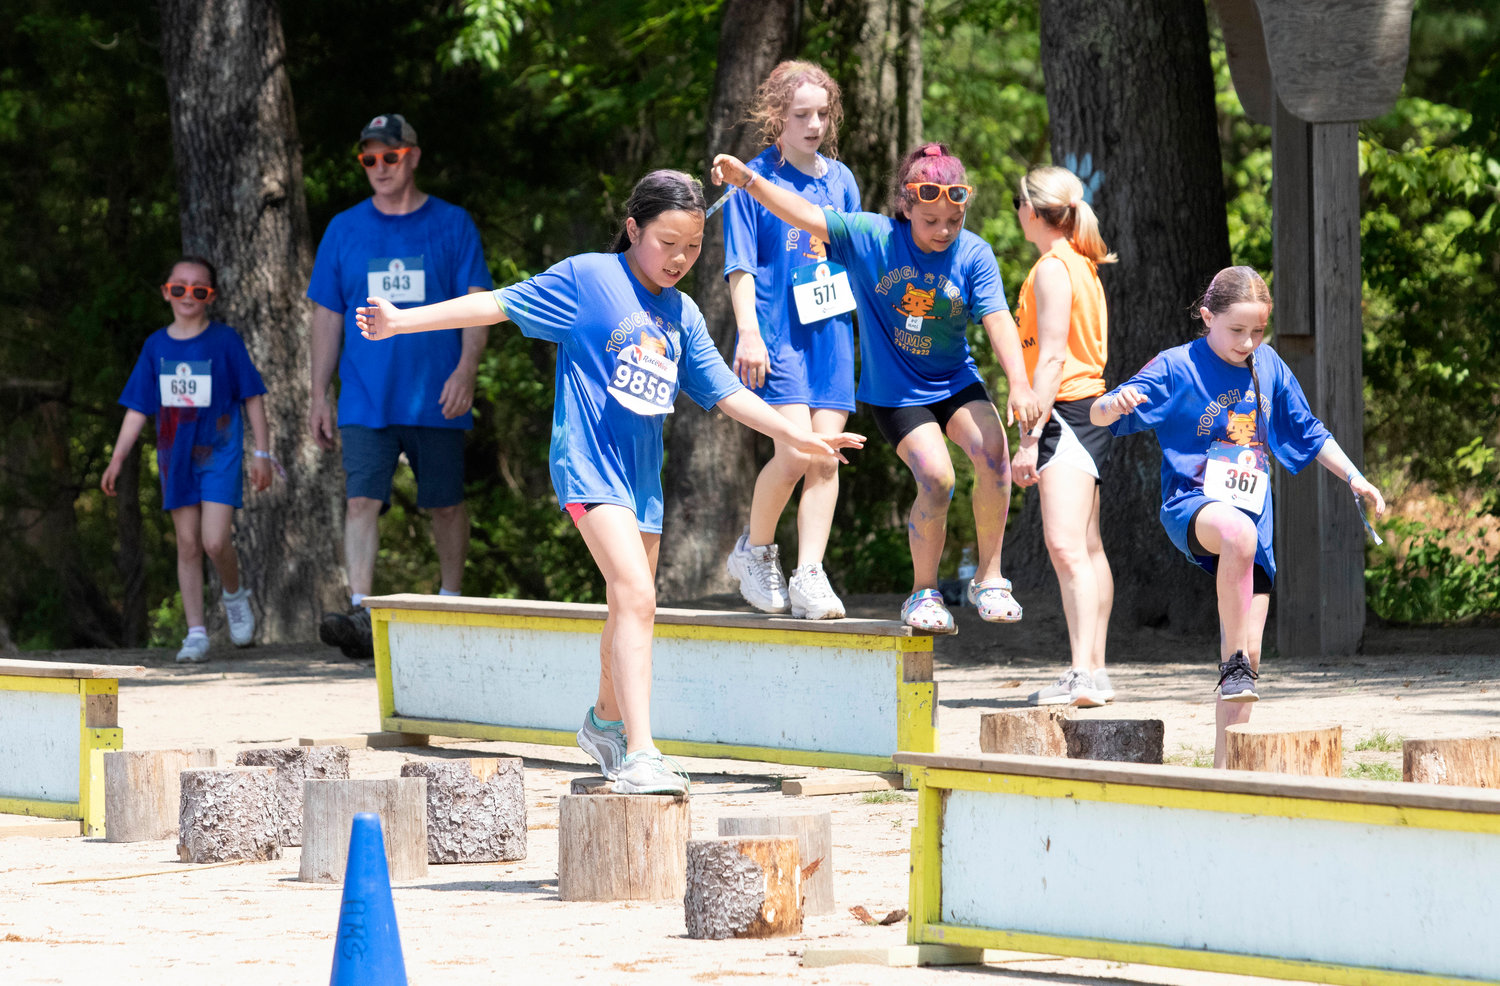 Competitors navigate balance beams and stump steps during the Tough Tiger adventure race on Sunday.